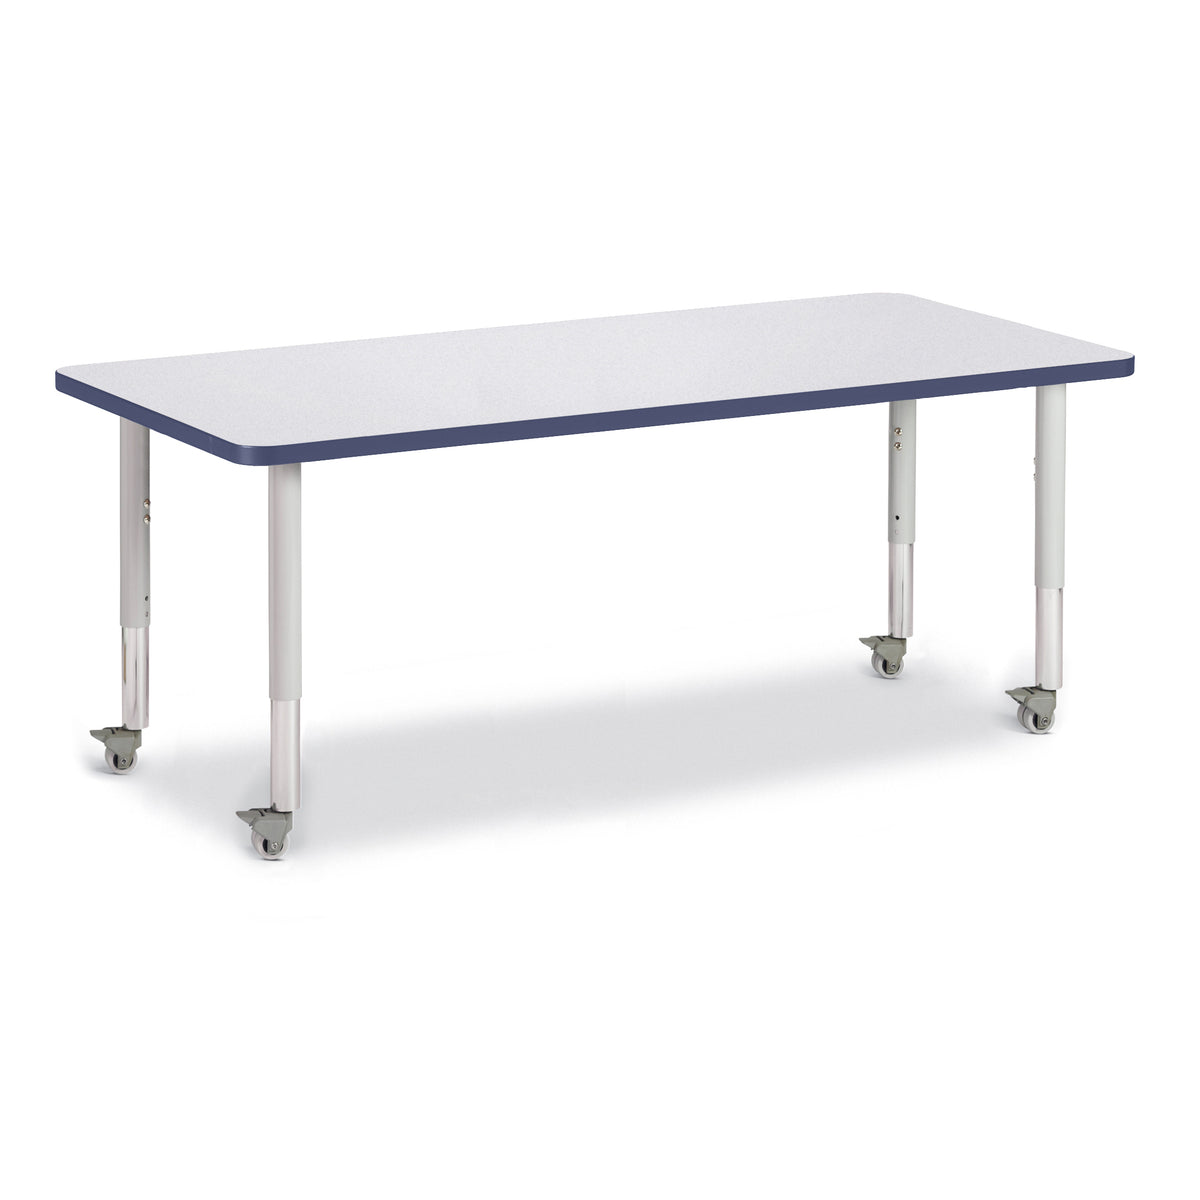 6413JCM112, Berries Rectangle Activity Table - 30" X 72", Mobile - Freckled Gray/Navy/Gray